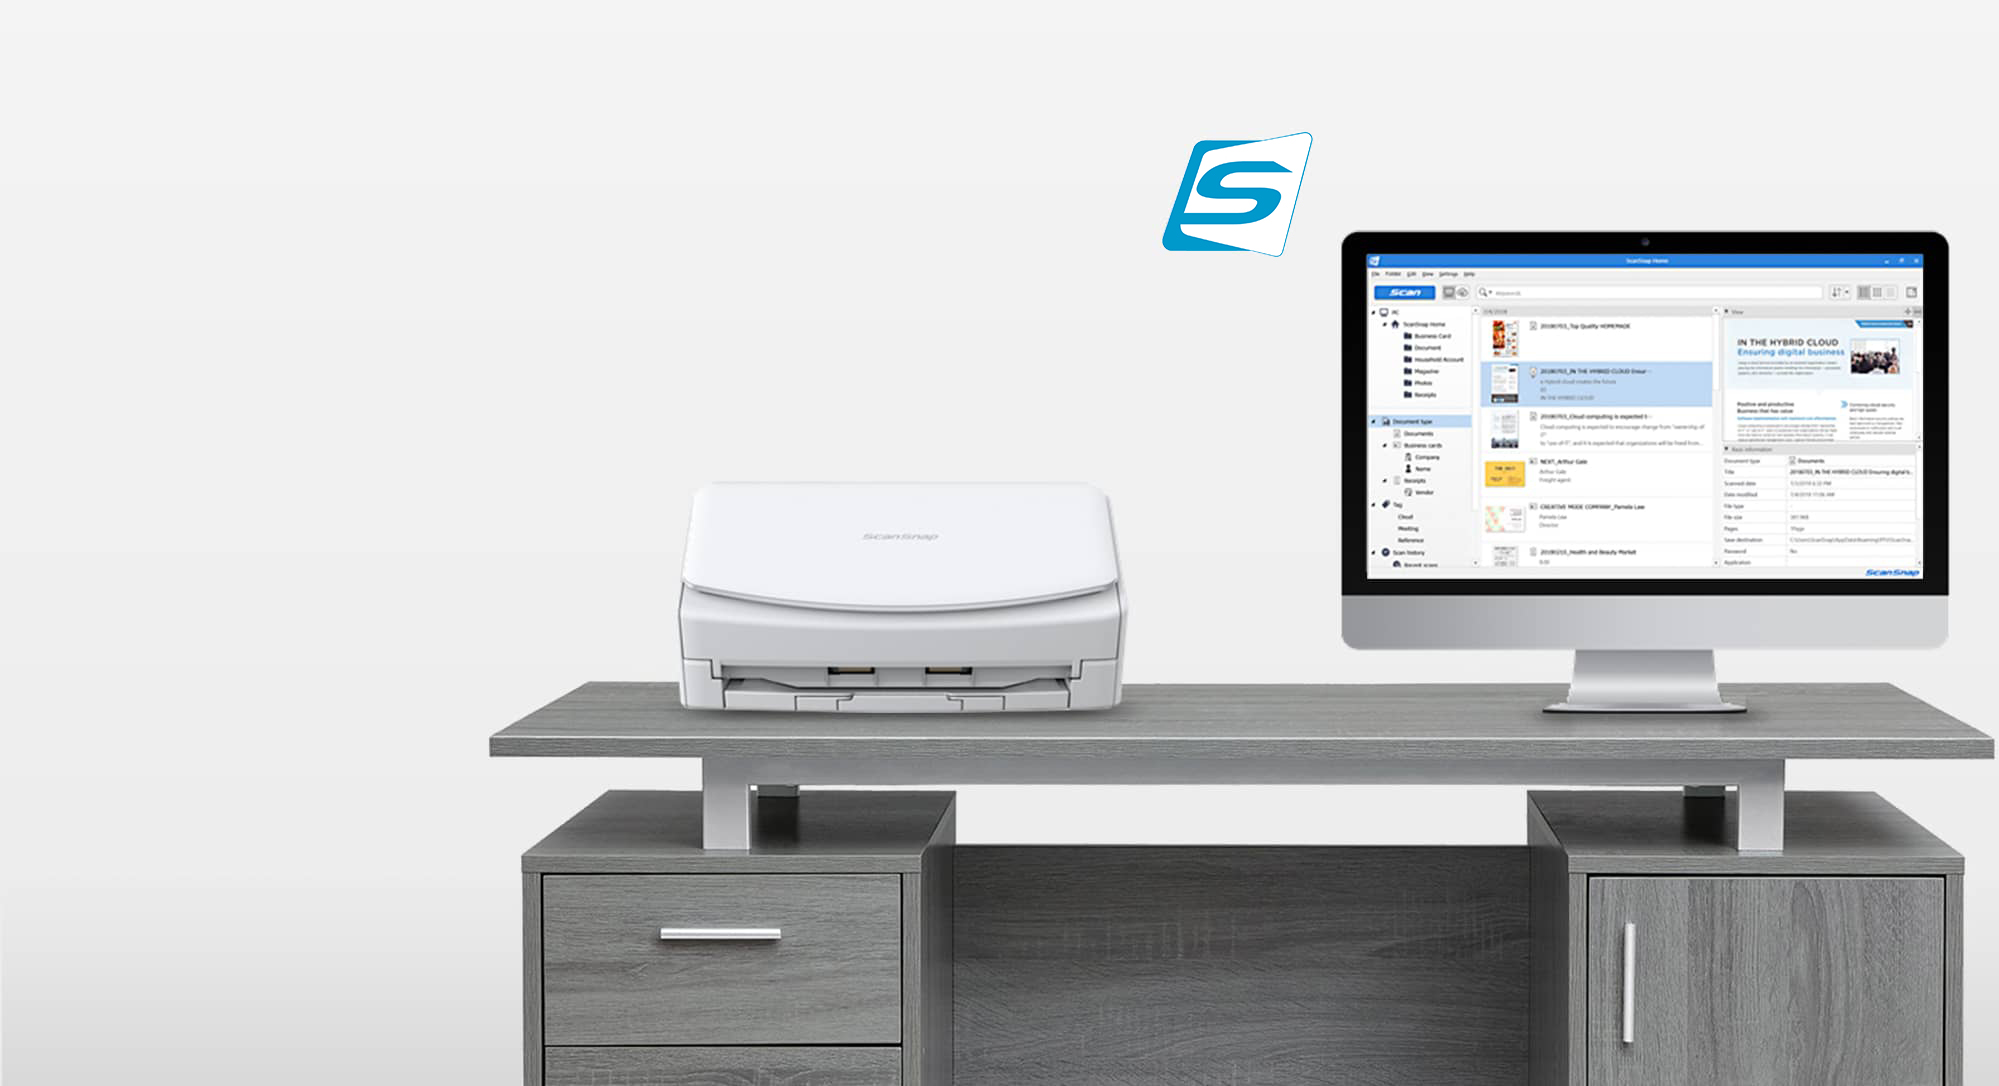 white ScanSnap scanner shown on a desk next to a computer screen